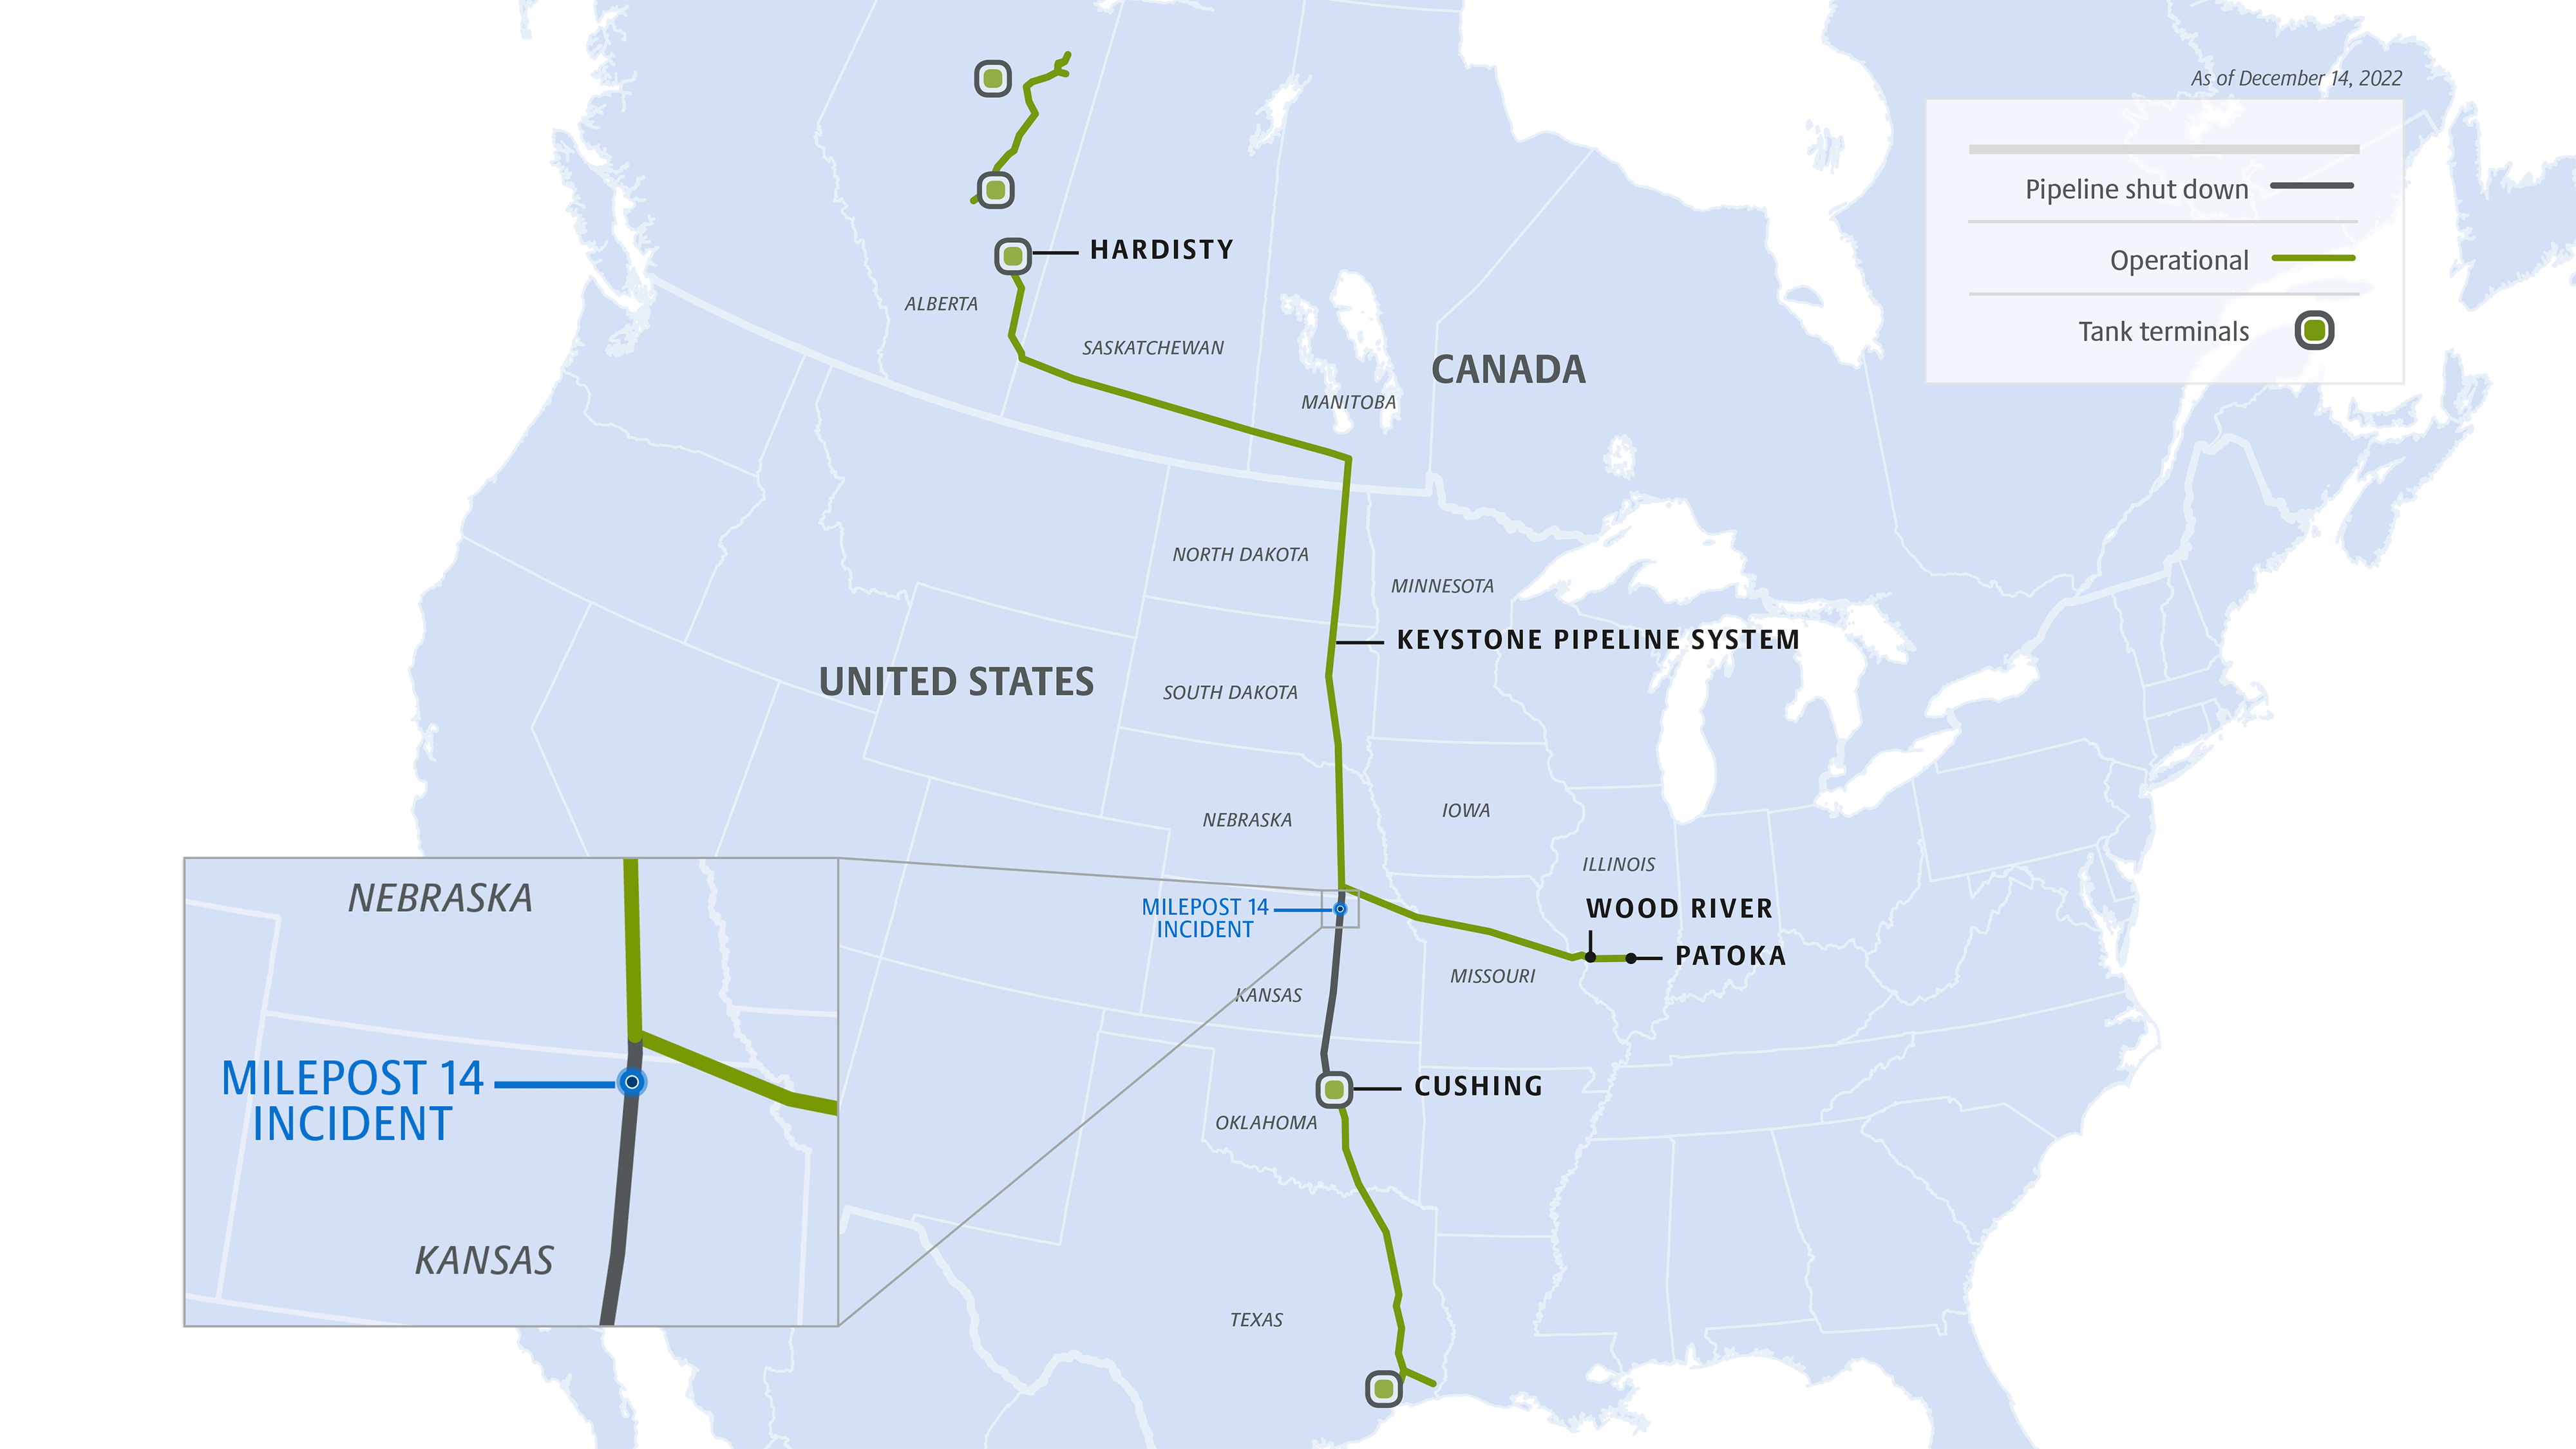 TC Energy Receives Approval To Reopen Keystone Pipeline After Repairs 